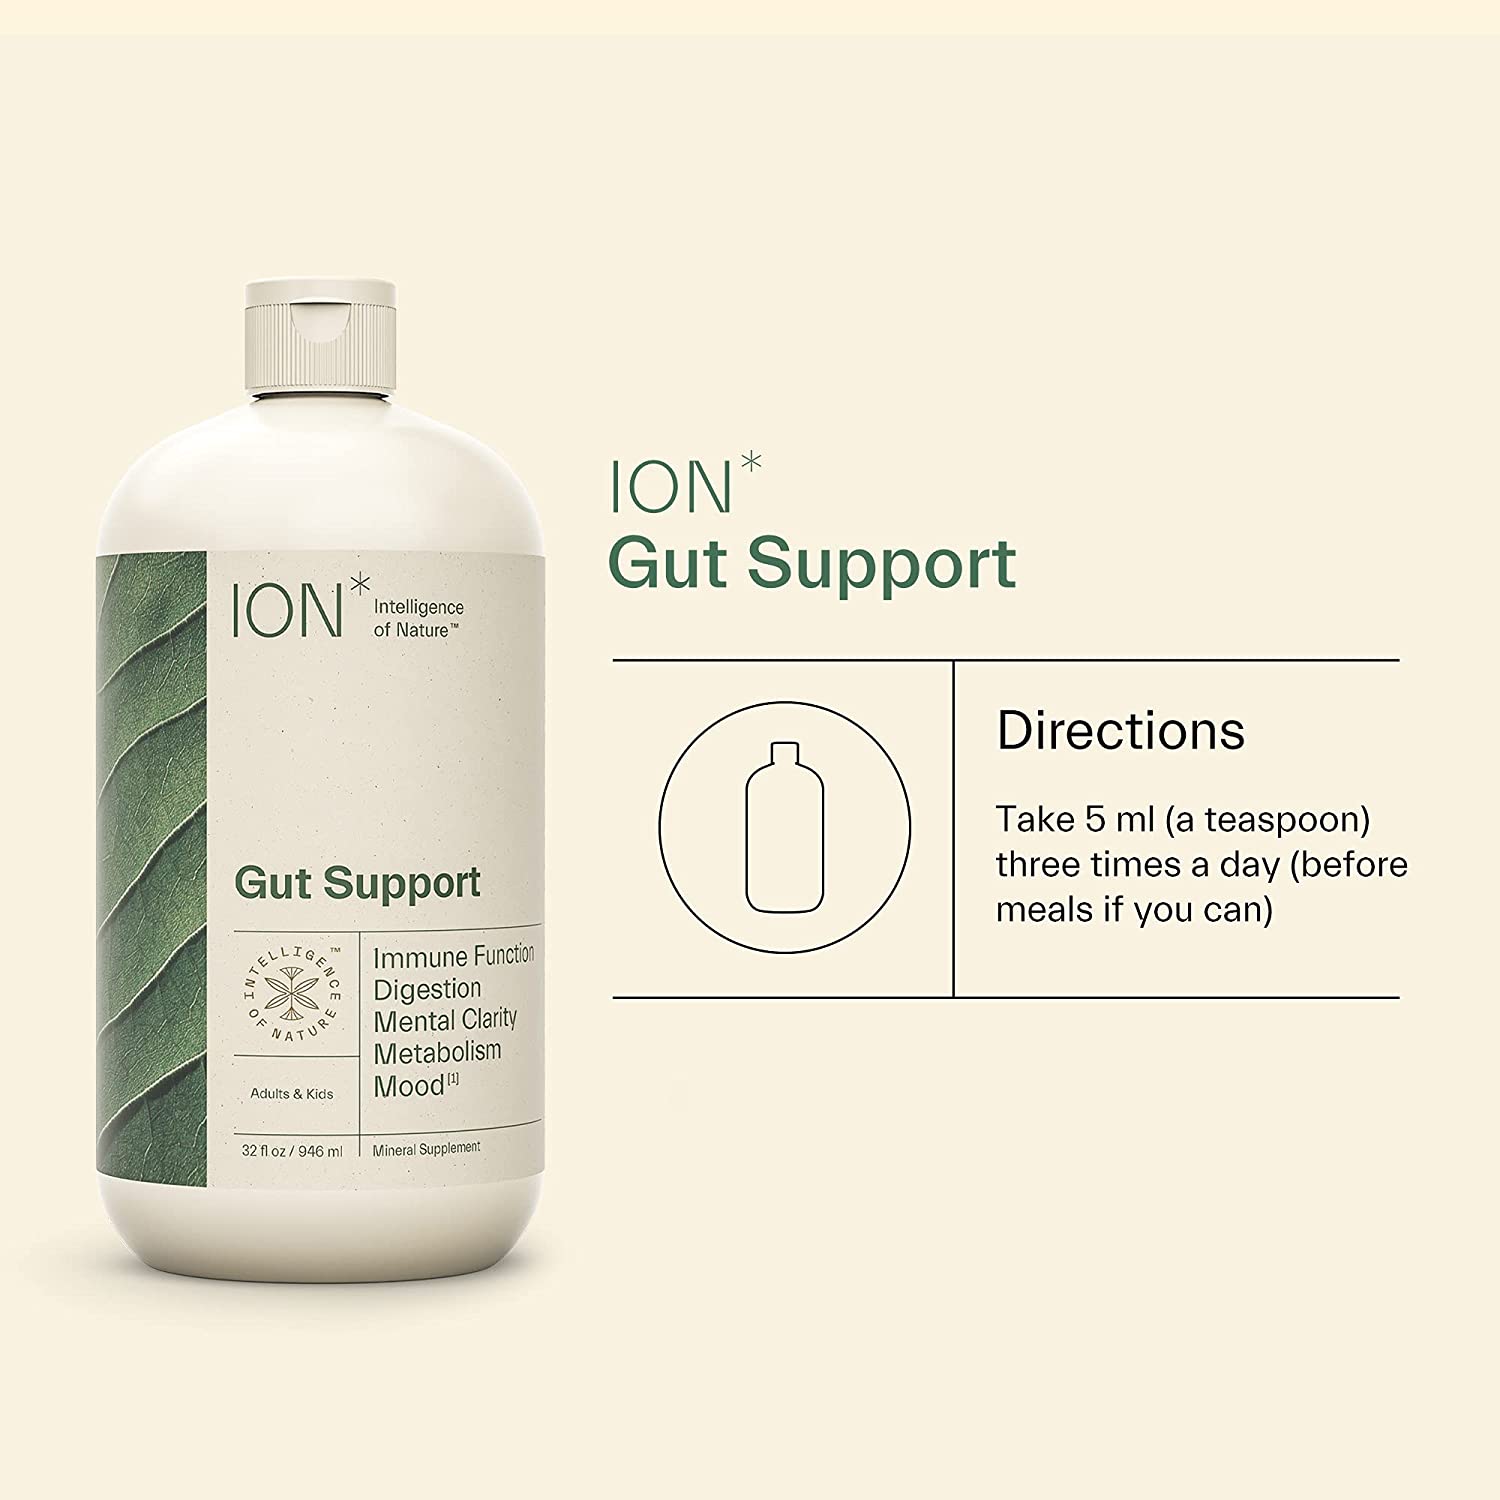 ION Intelligence of Nature Gut Support - 946 ml-3